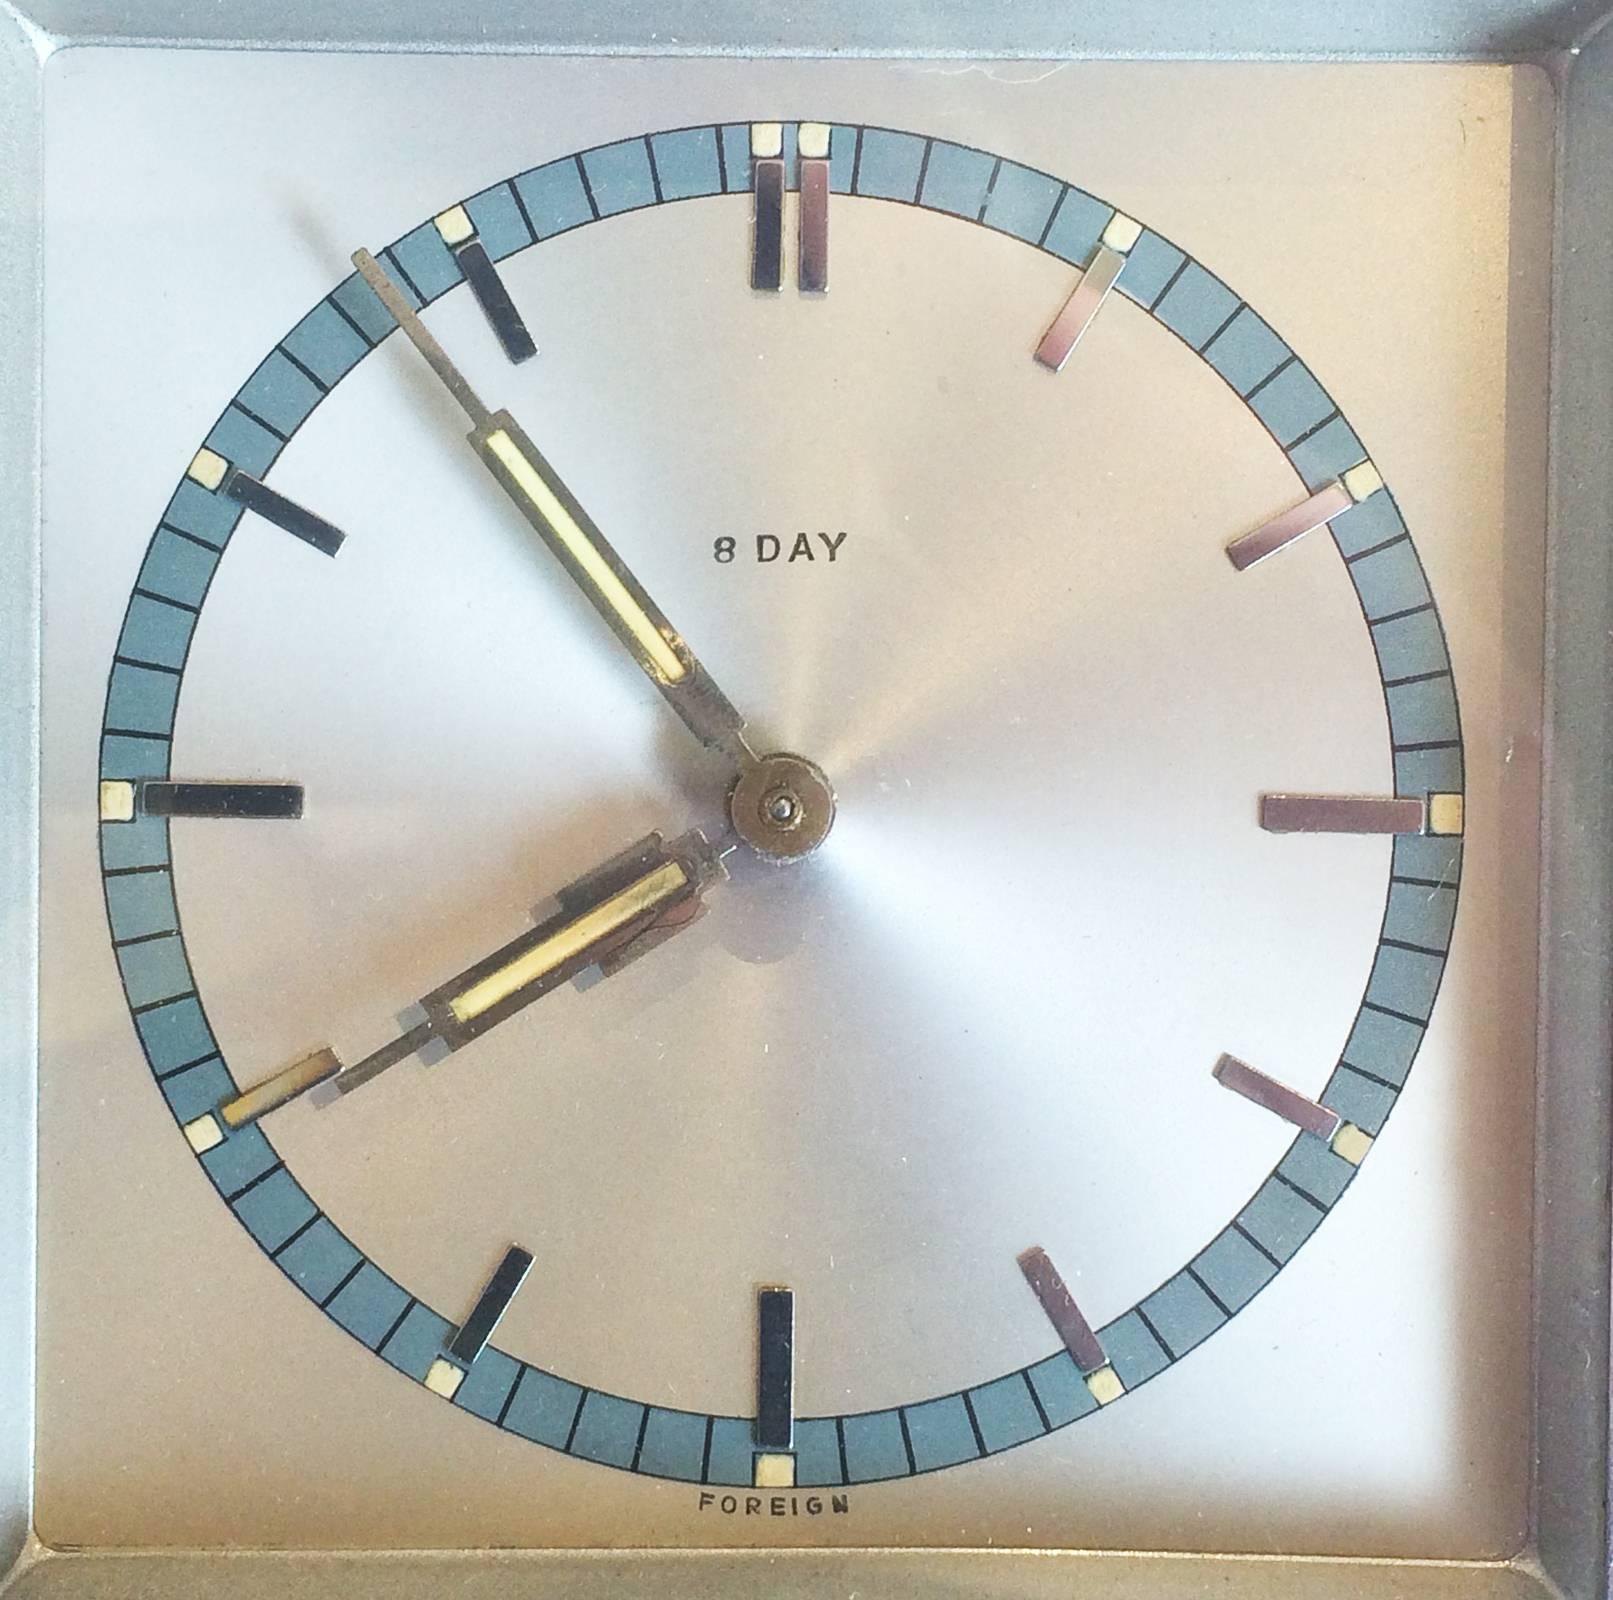 Art Deco French clock with bright chrome outer and satin chrome face, sky blue rim with chrome batons for 5 minute increments, double baton for Noon, and aluminous hands and small illuminous squares at each baton. Clock face is immaculate, with some